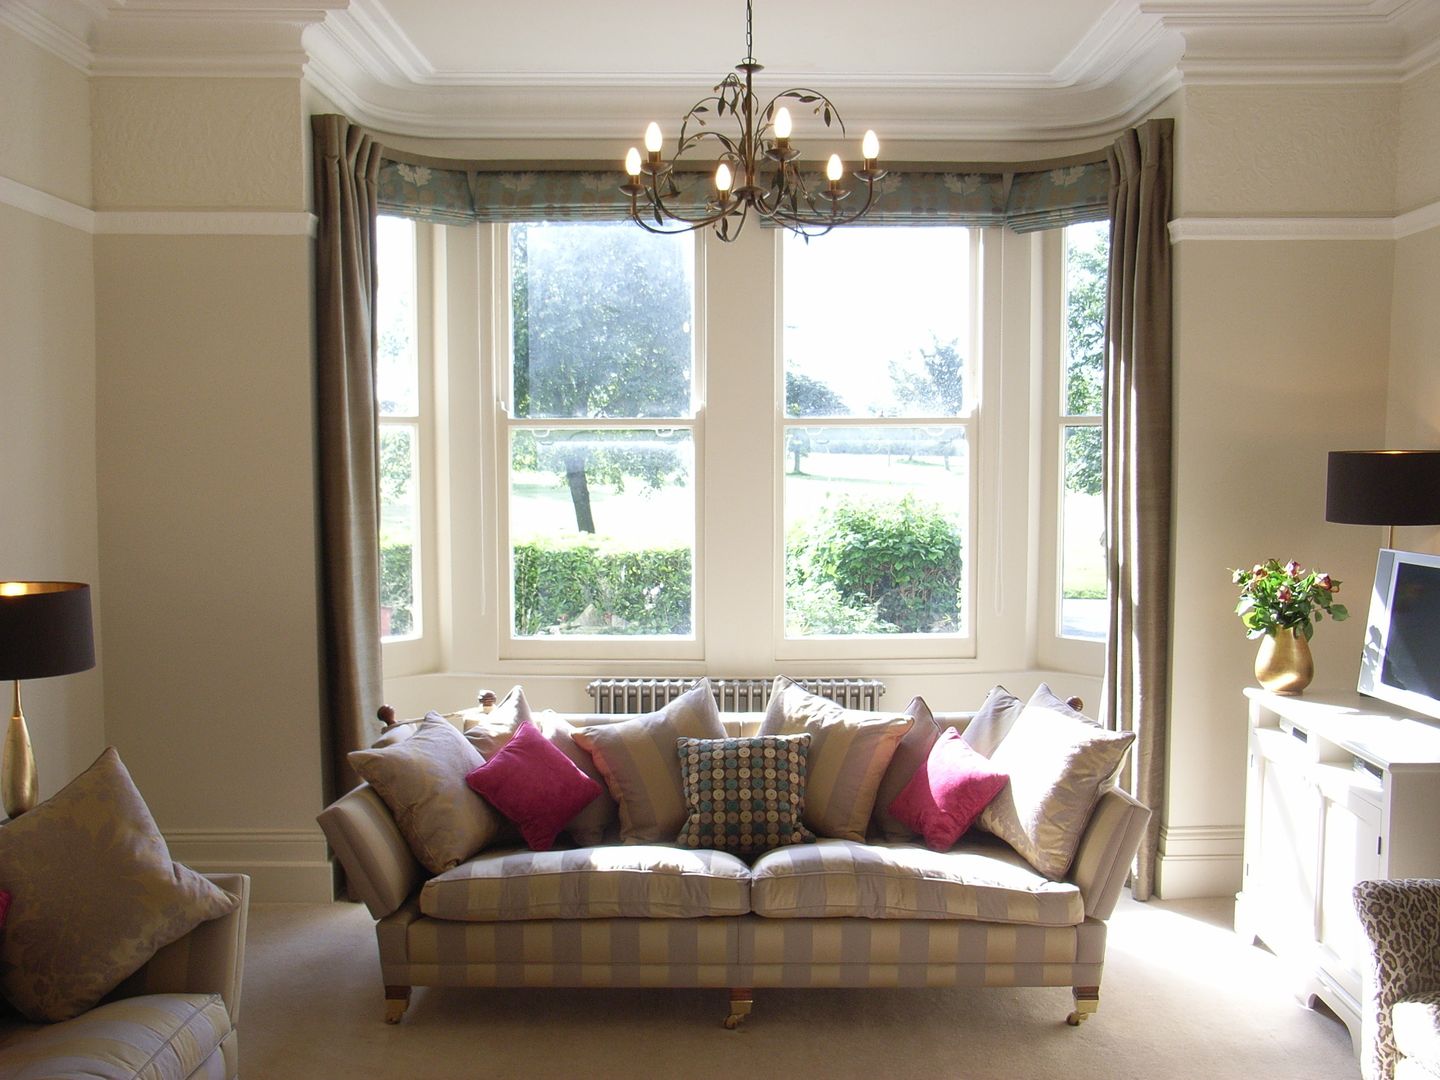 Classic View of Contemporised Victorian Living Room homify クラシックデザインの リビング large bay window,roman blinds,dress curtains,victorian home,victorian property,classic sofa,large sofa,taupe colour scheme,pink accents,living room decor,living room furnish